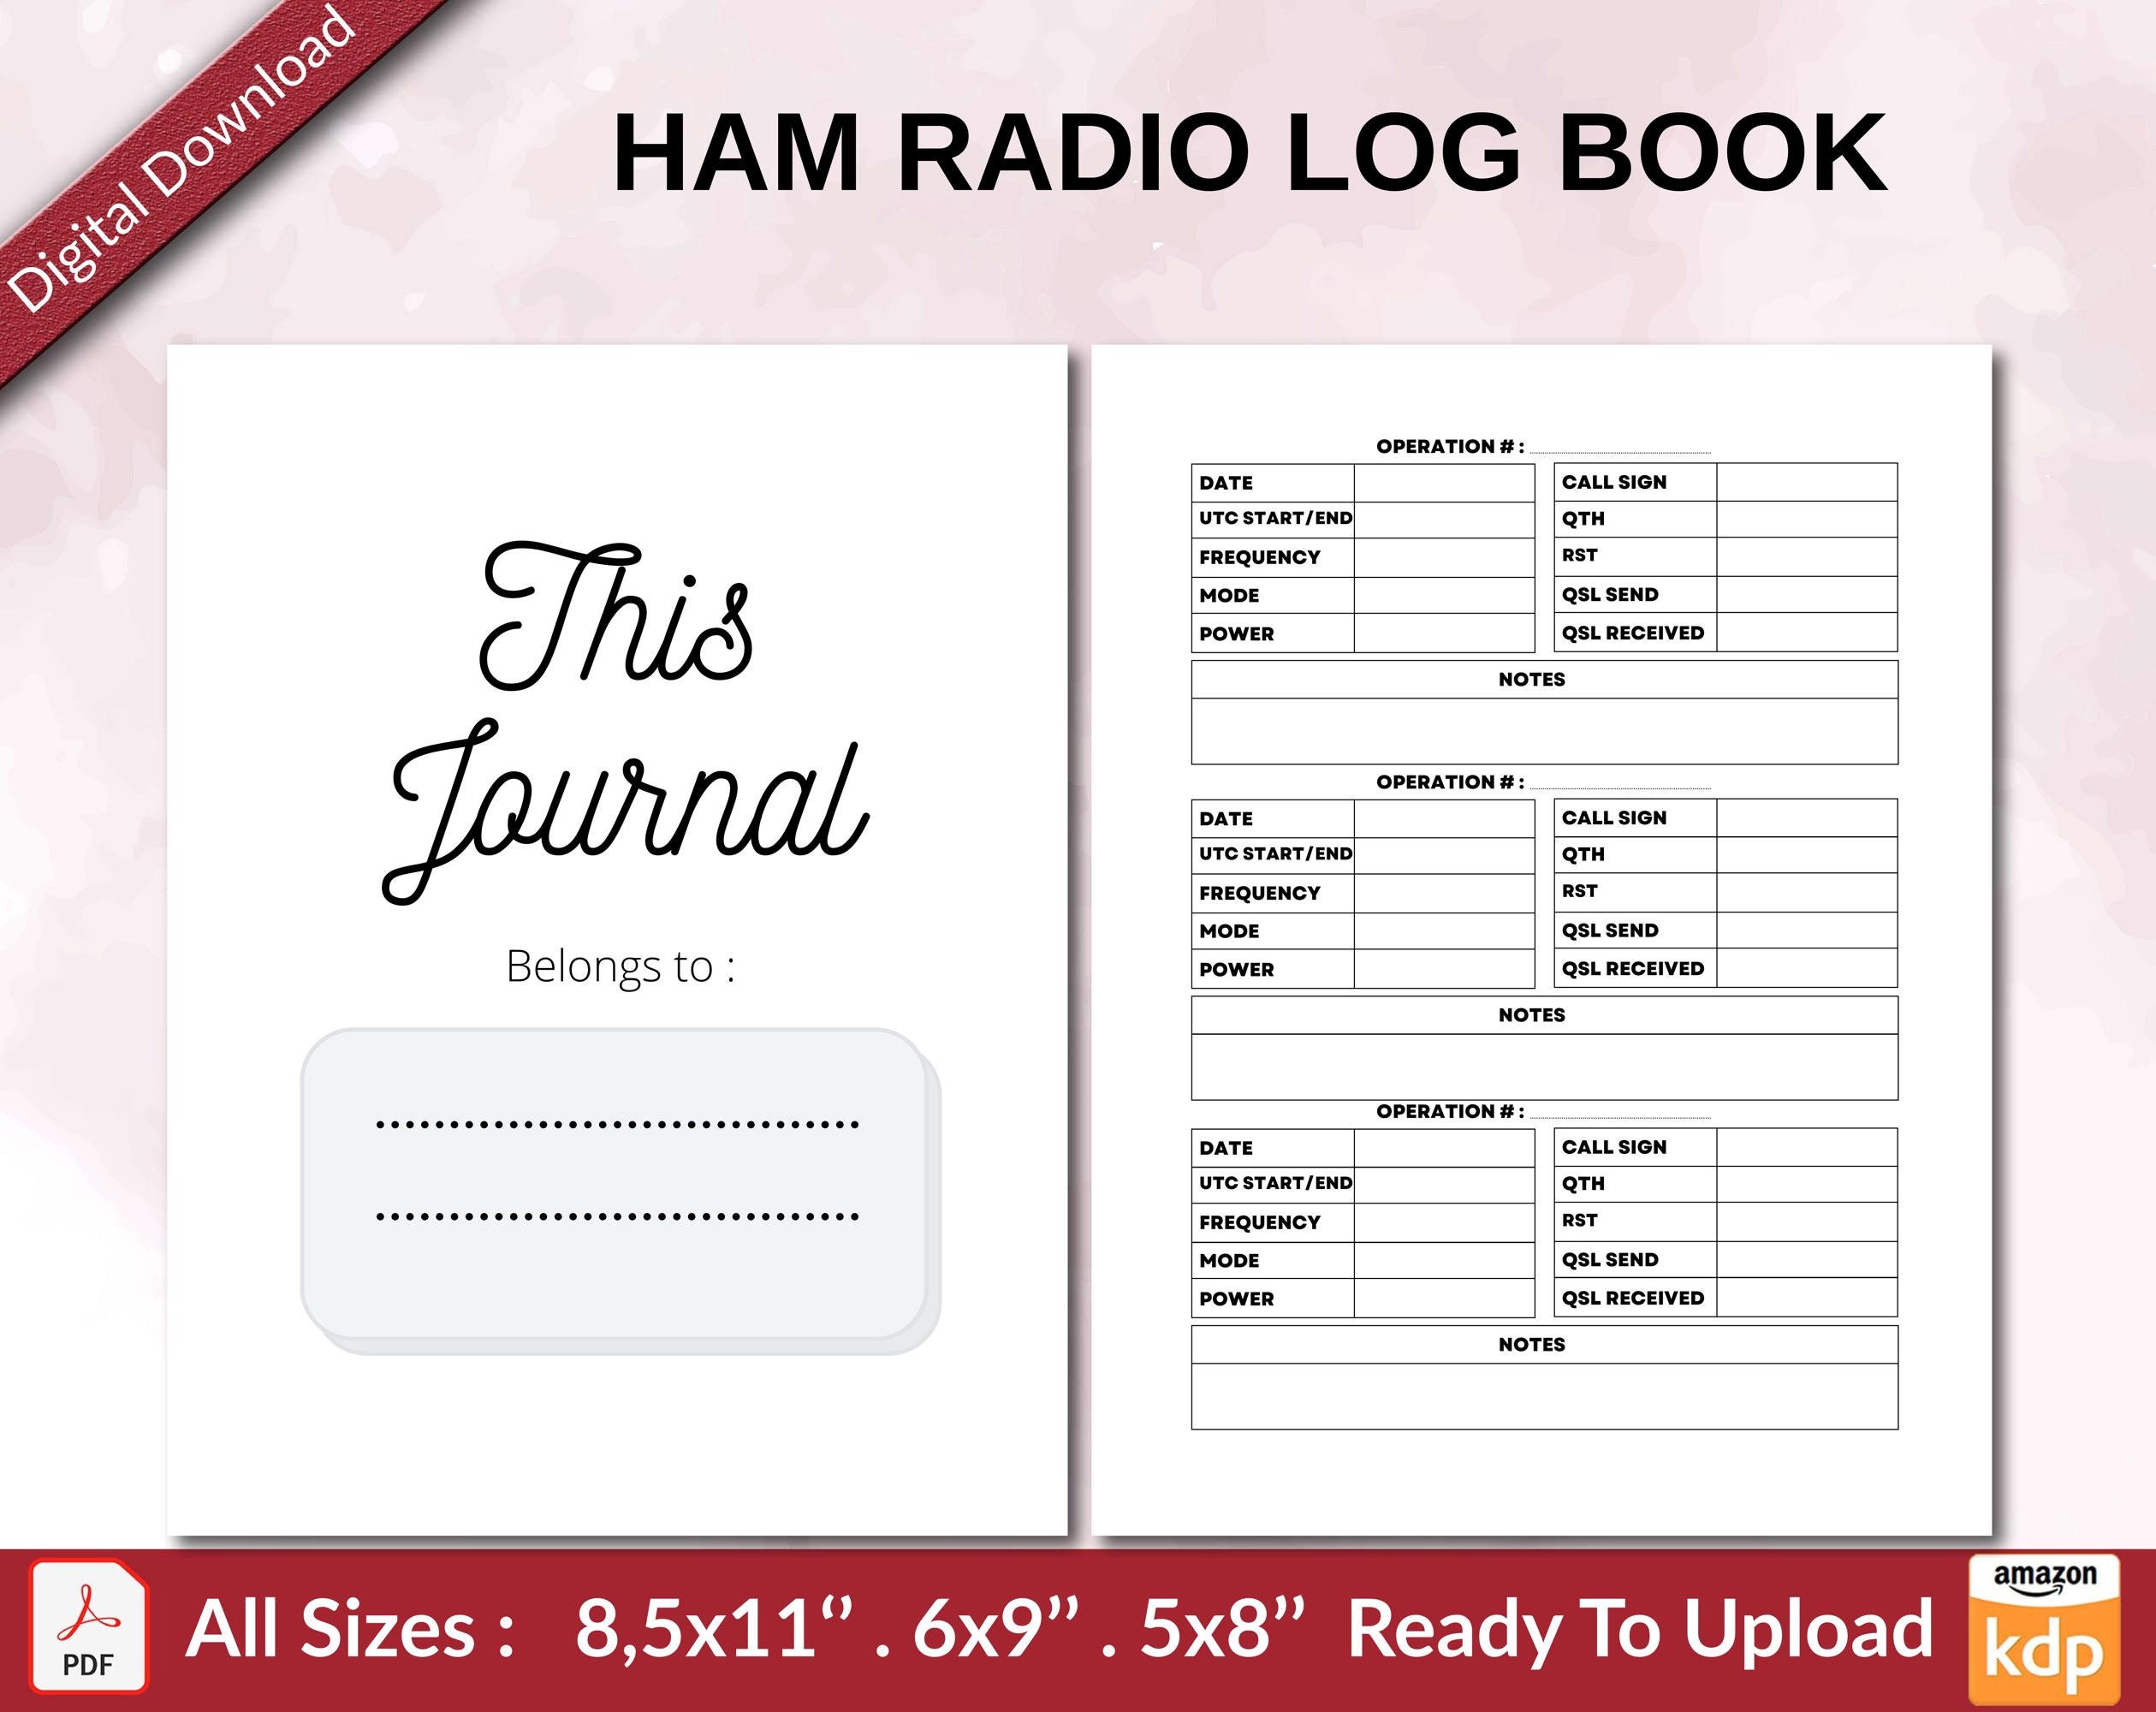 HAM Radio Log Book 120 Pages Ready to Upload PDF Used as